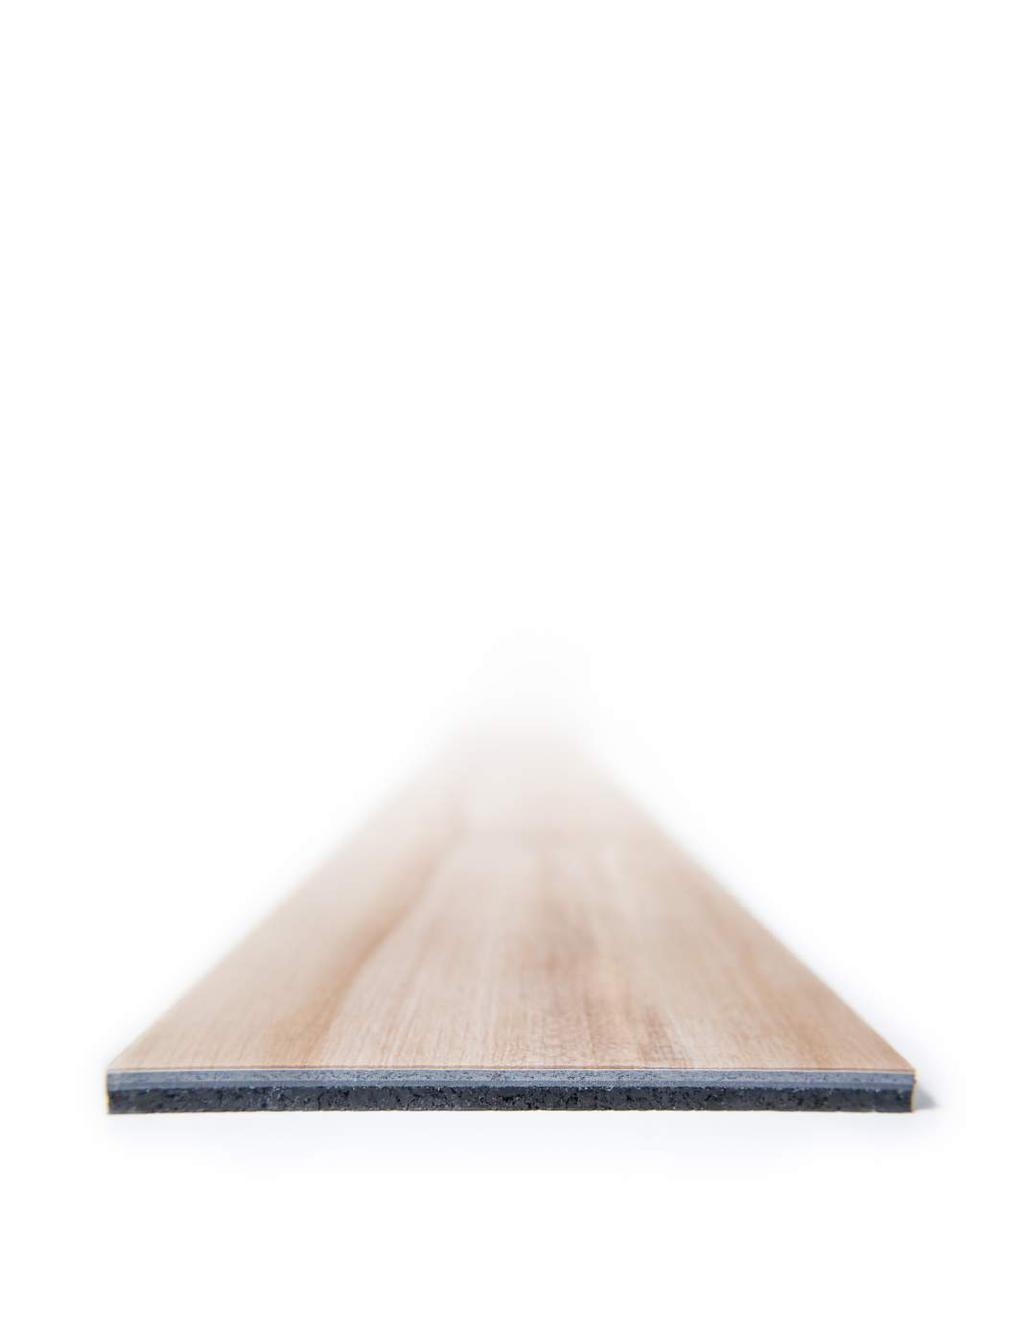 5 TRUE SOLUTIONS TO ALL YOUR FLOORING NEEDS EXCLUSIVELY AVAILABLE AT